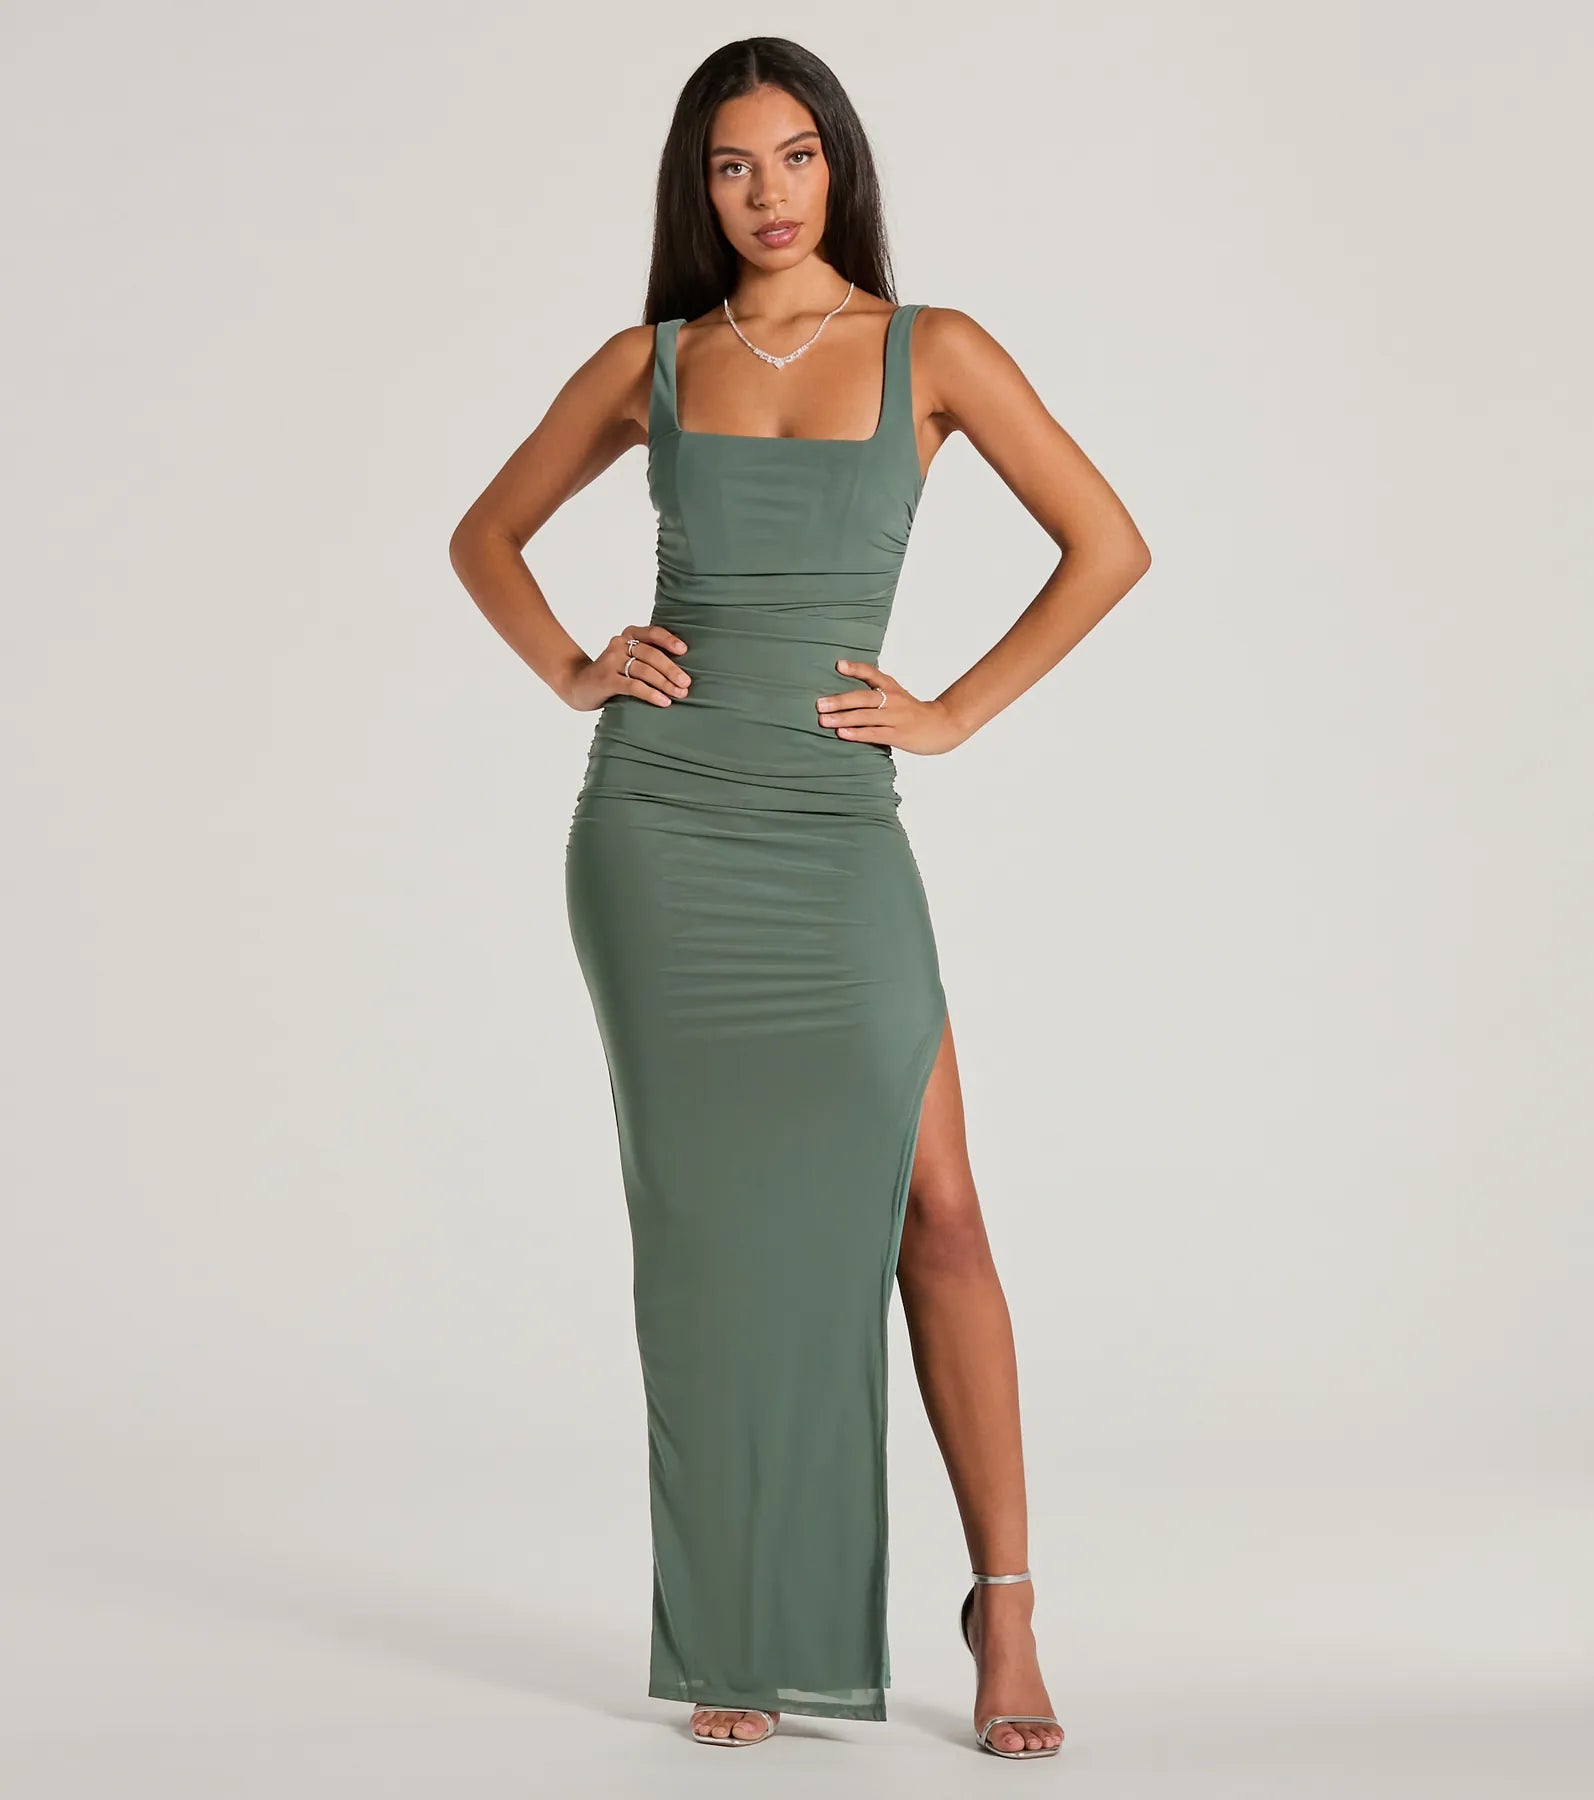 Sophisticated Knit Square Neck Back Zipper Mesh Ruched Slit Stretchy Sleeveless Bridesmaid Dress